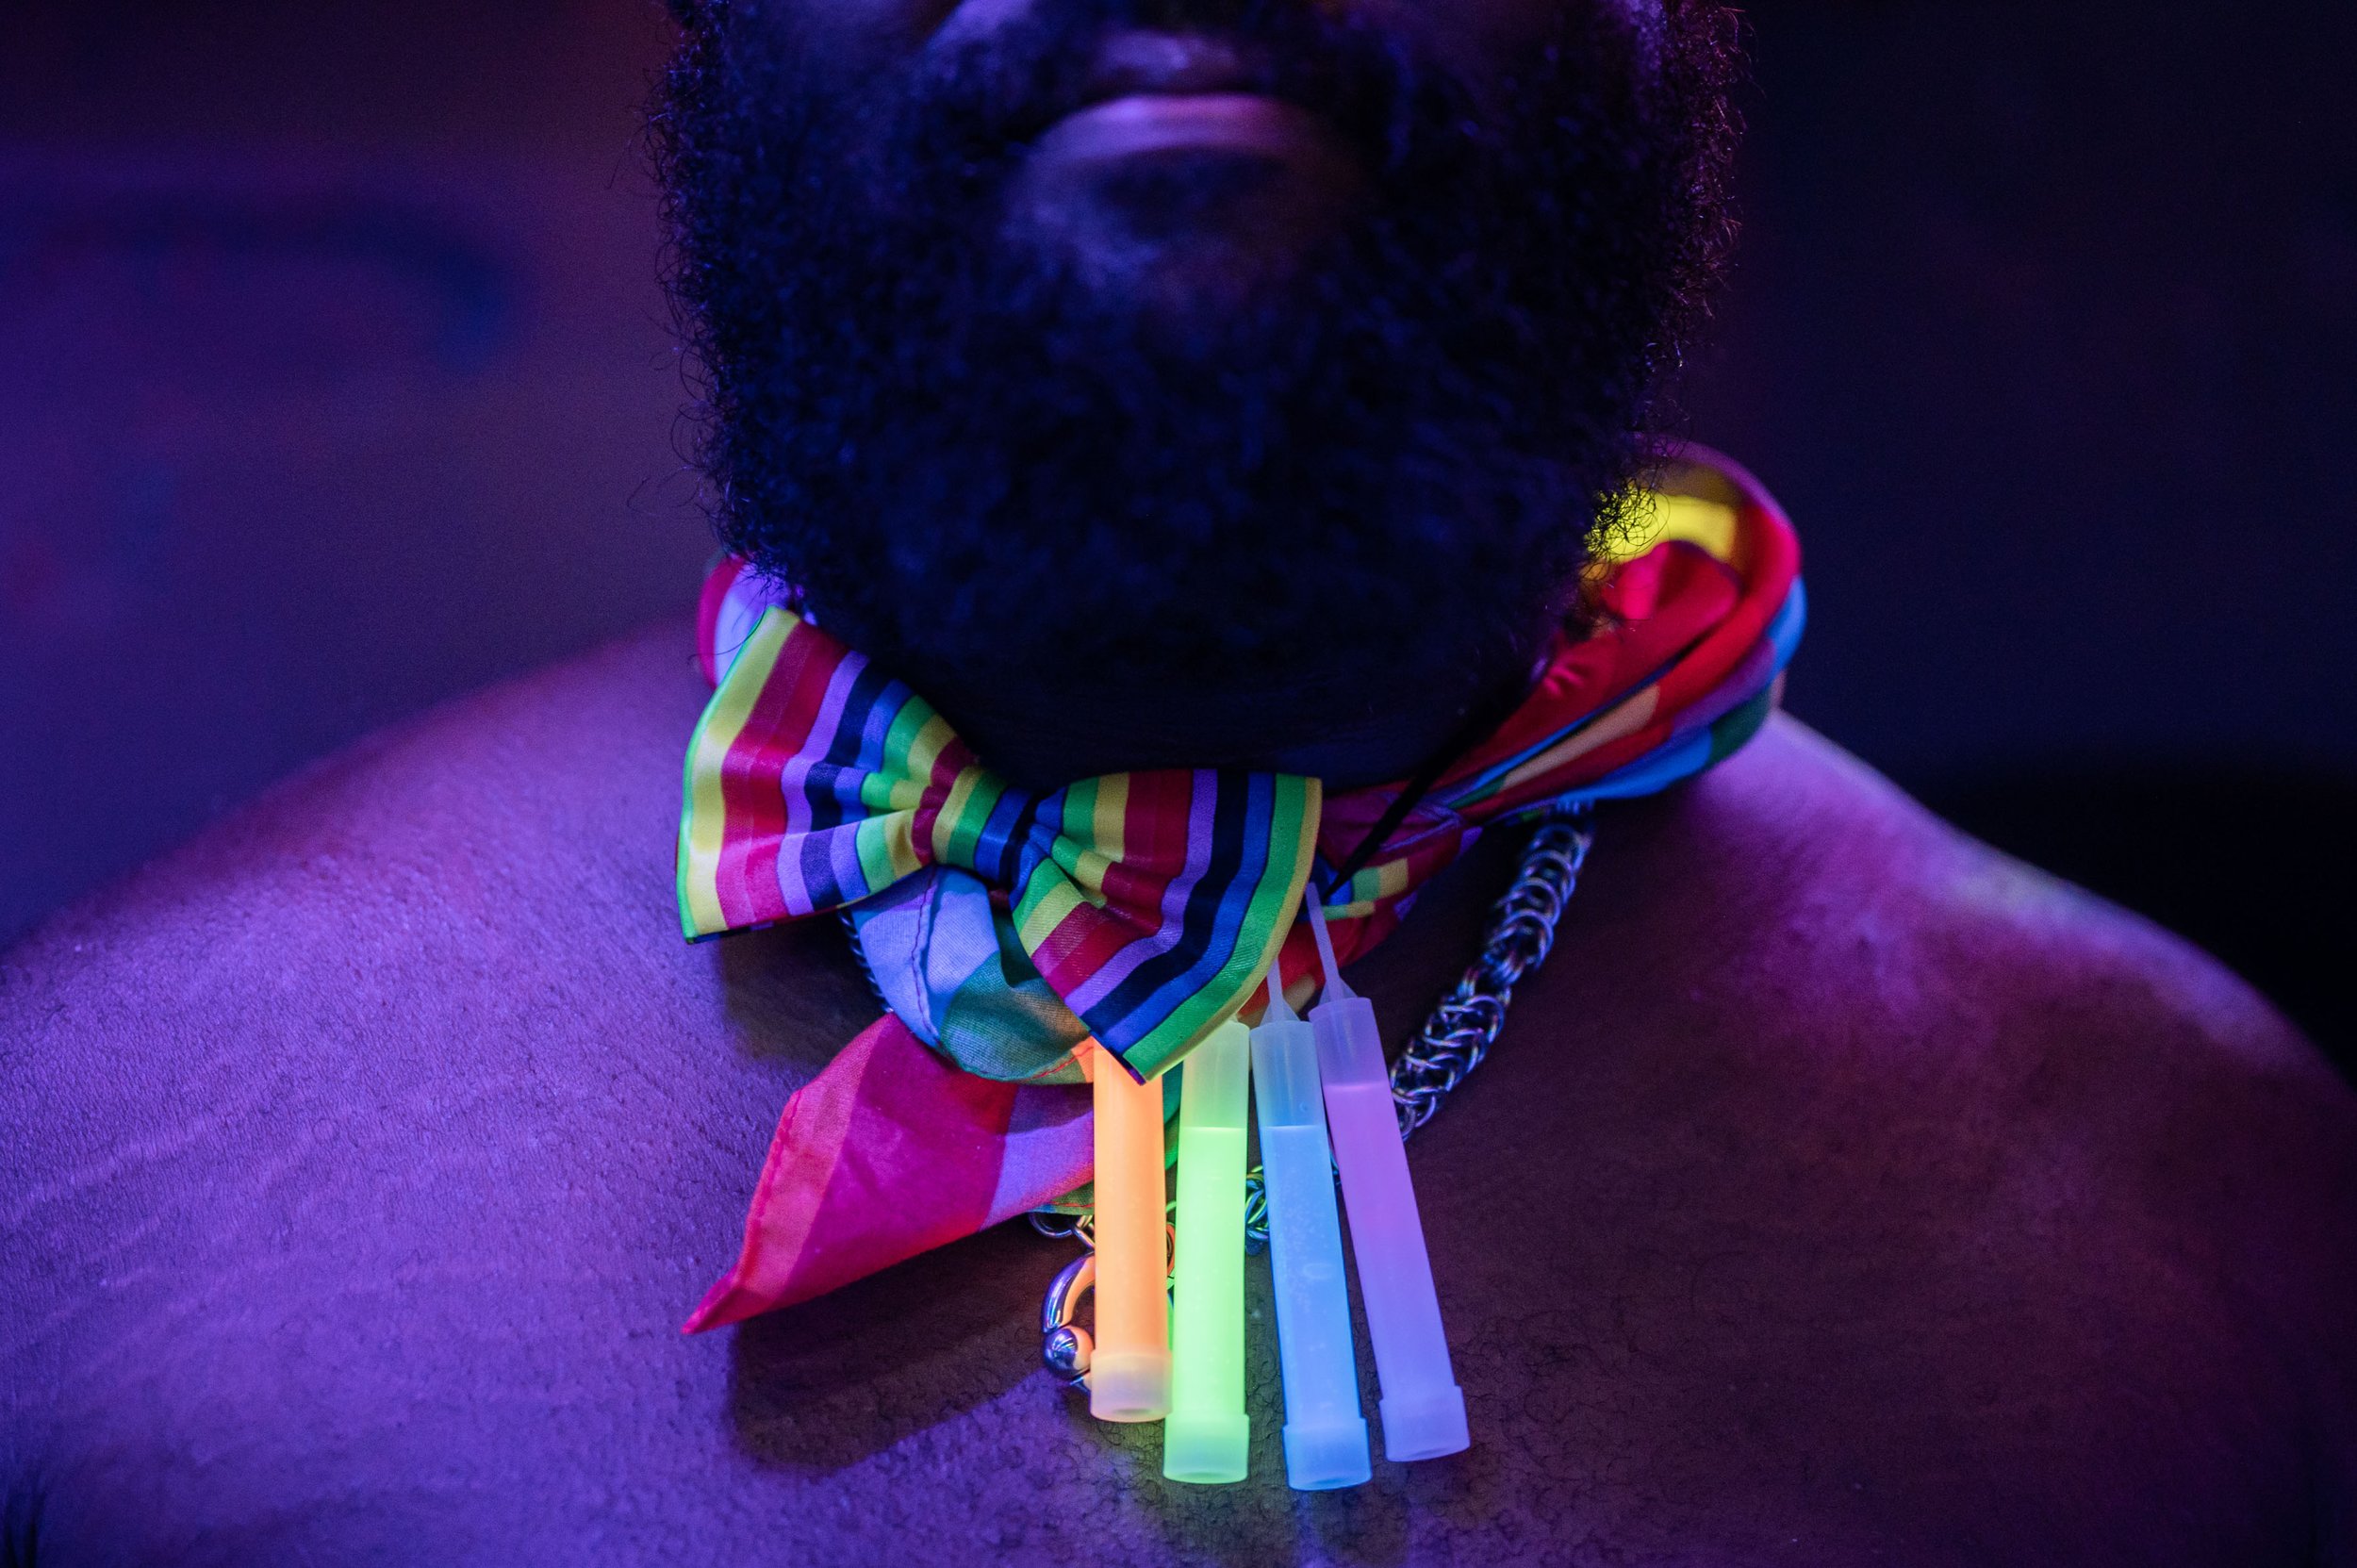  Moe Hayward poses with accessories during a Neon Bear Glow Party at MJ’s Tavern in Norfolk, Va. on Saturday, June 17, 2023. (Tess Crowley / The Virginian-Pilot)  This year’s Hampton Roads Pride brought together the LGBTQ+ community and its allies fo